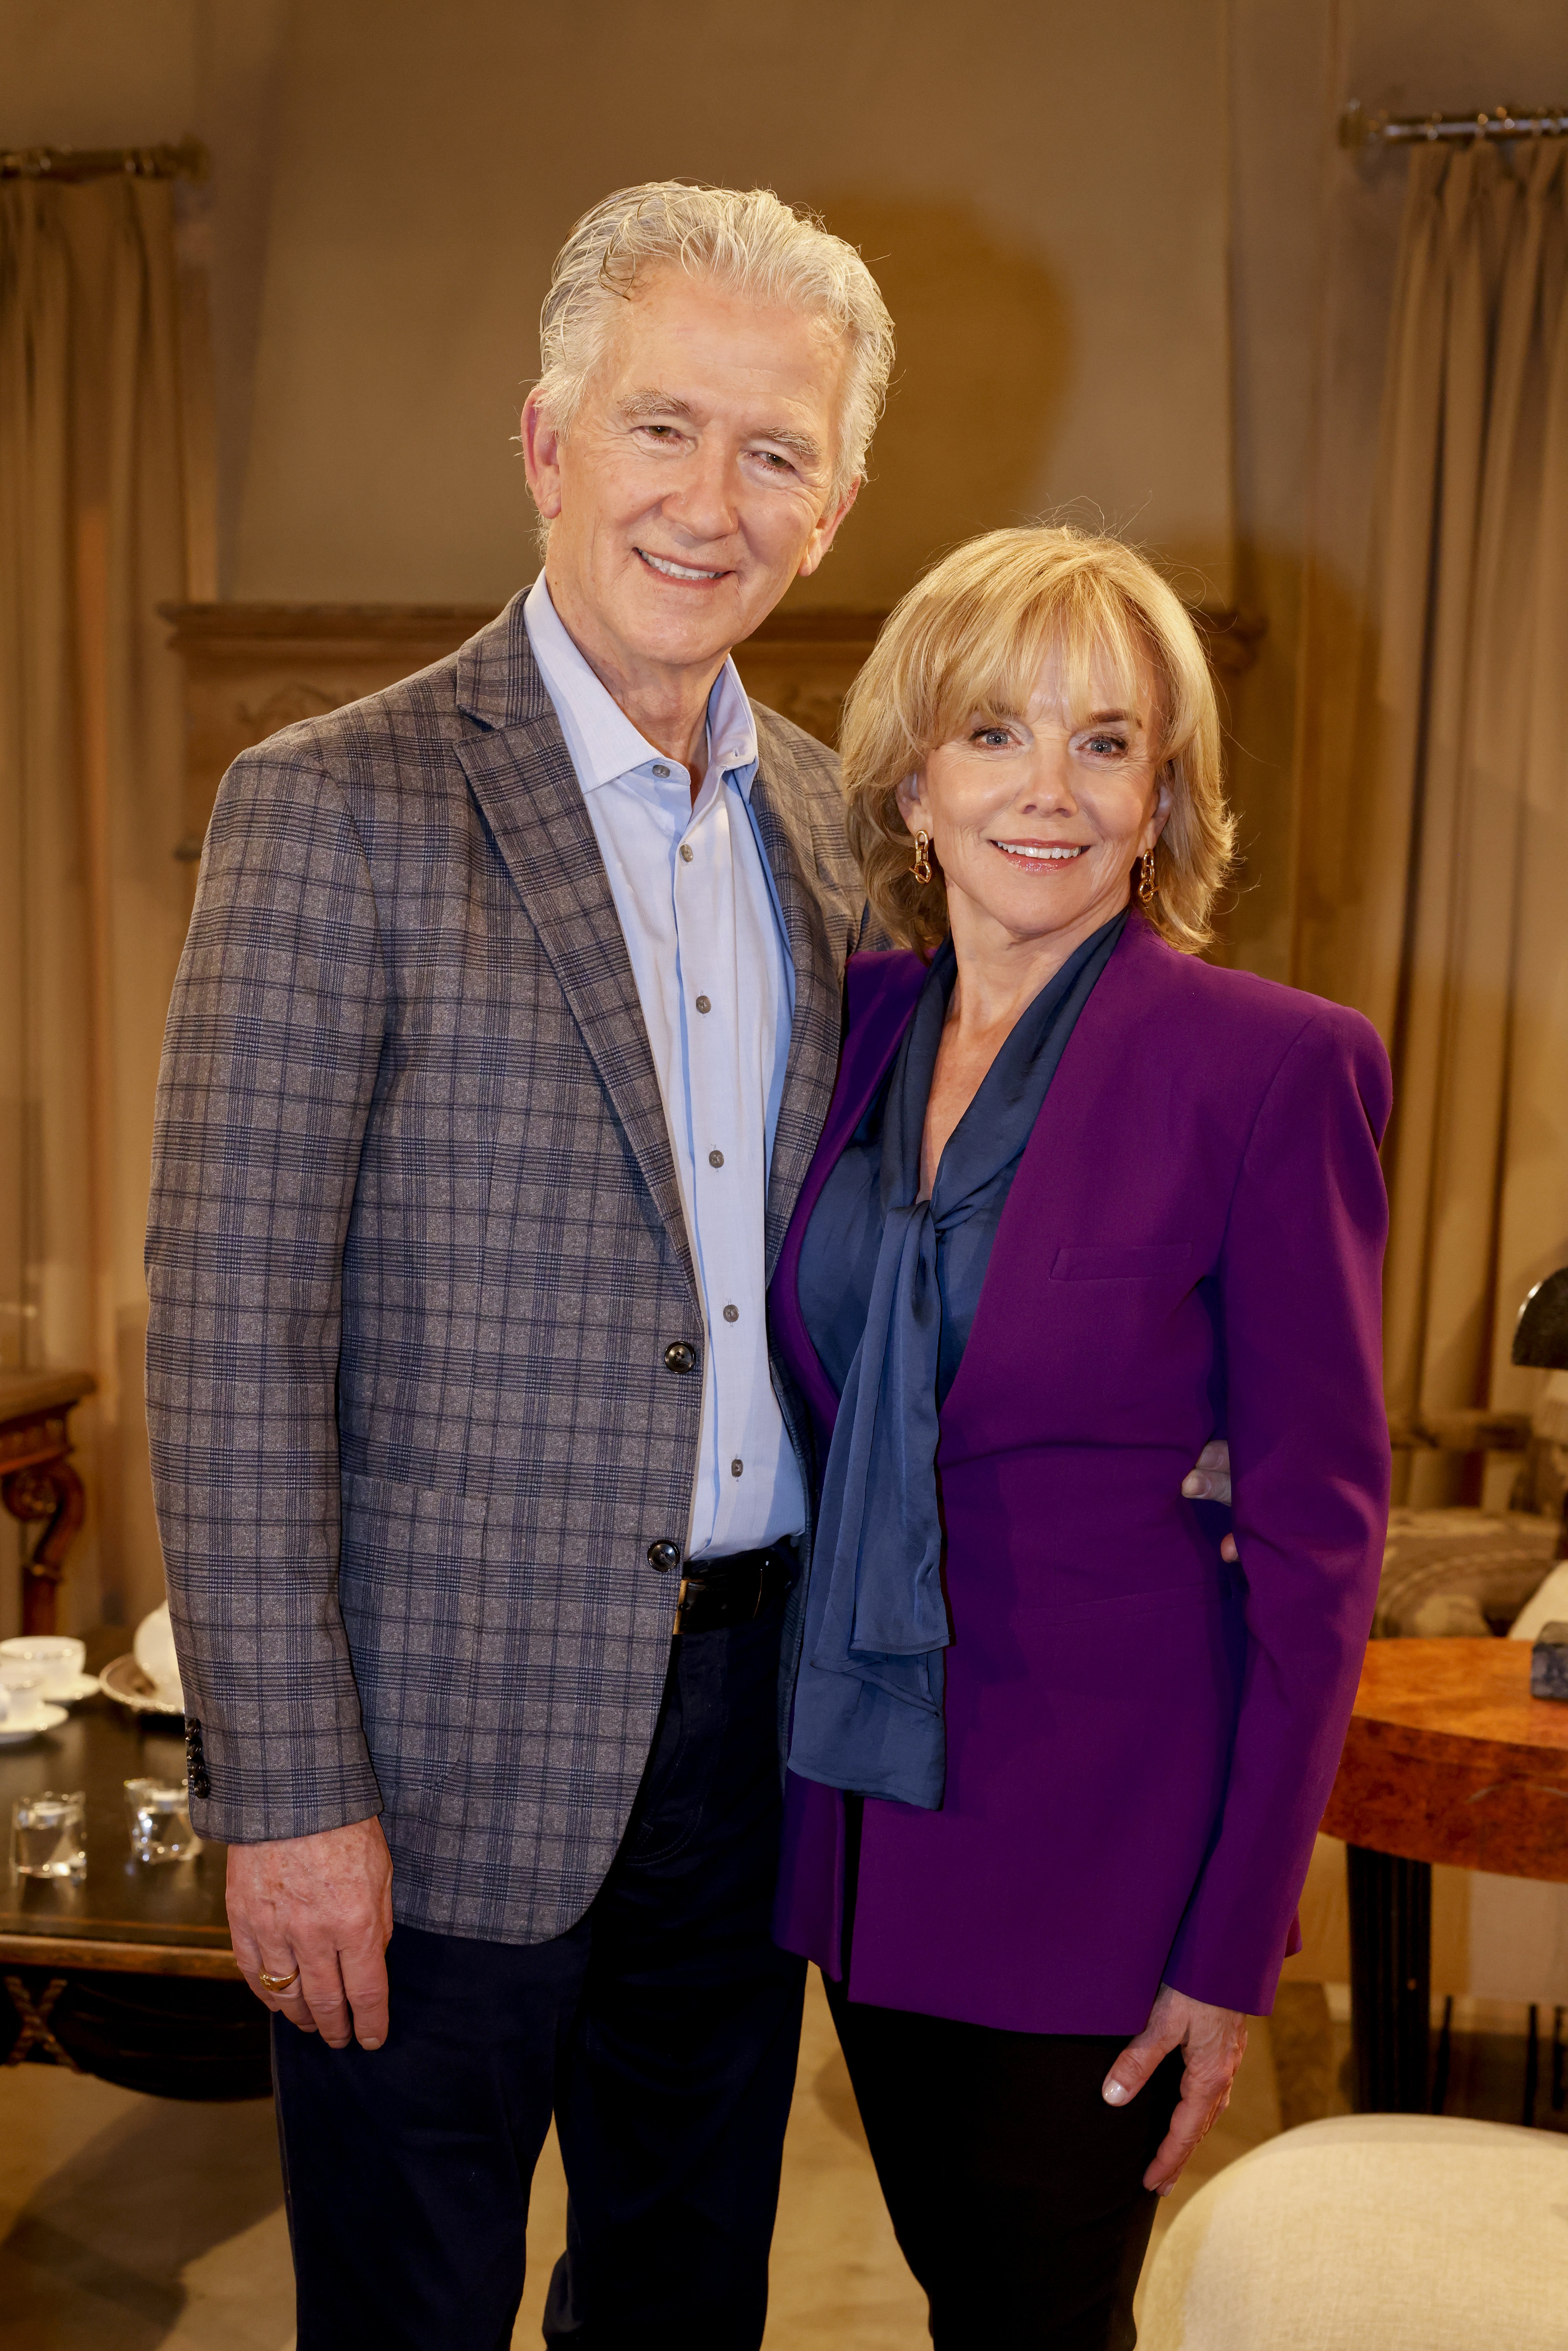 Patrick Duffy and Linda Purl pictured on the set of the CBS Daytime series "The Bold and The Beautiful" on October 24, 2022, in Los Angeles, California. | Source: Getty Images